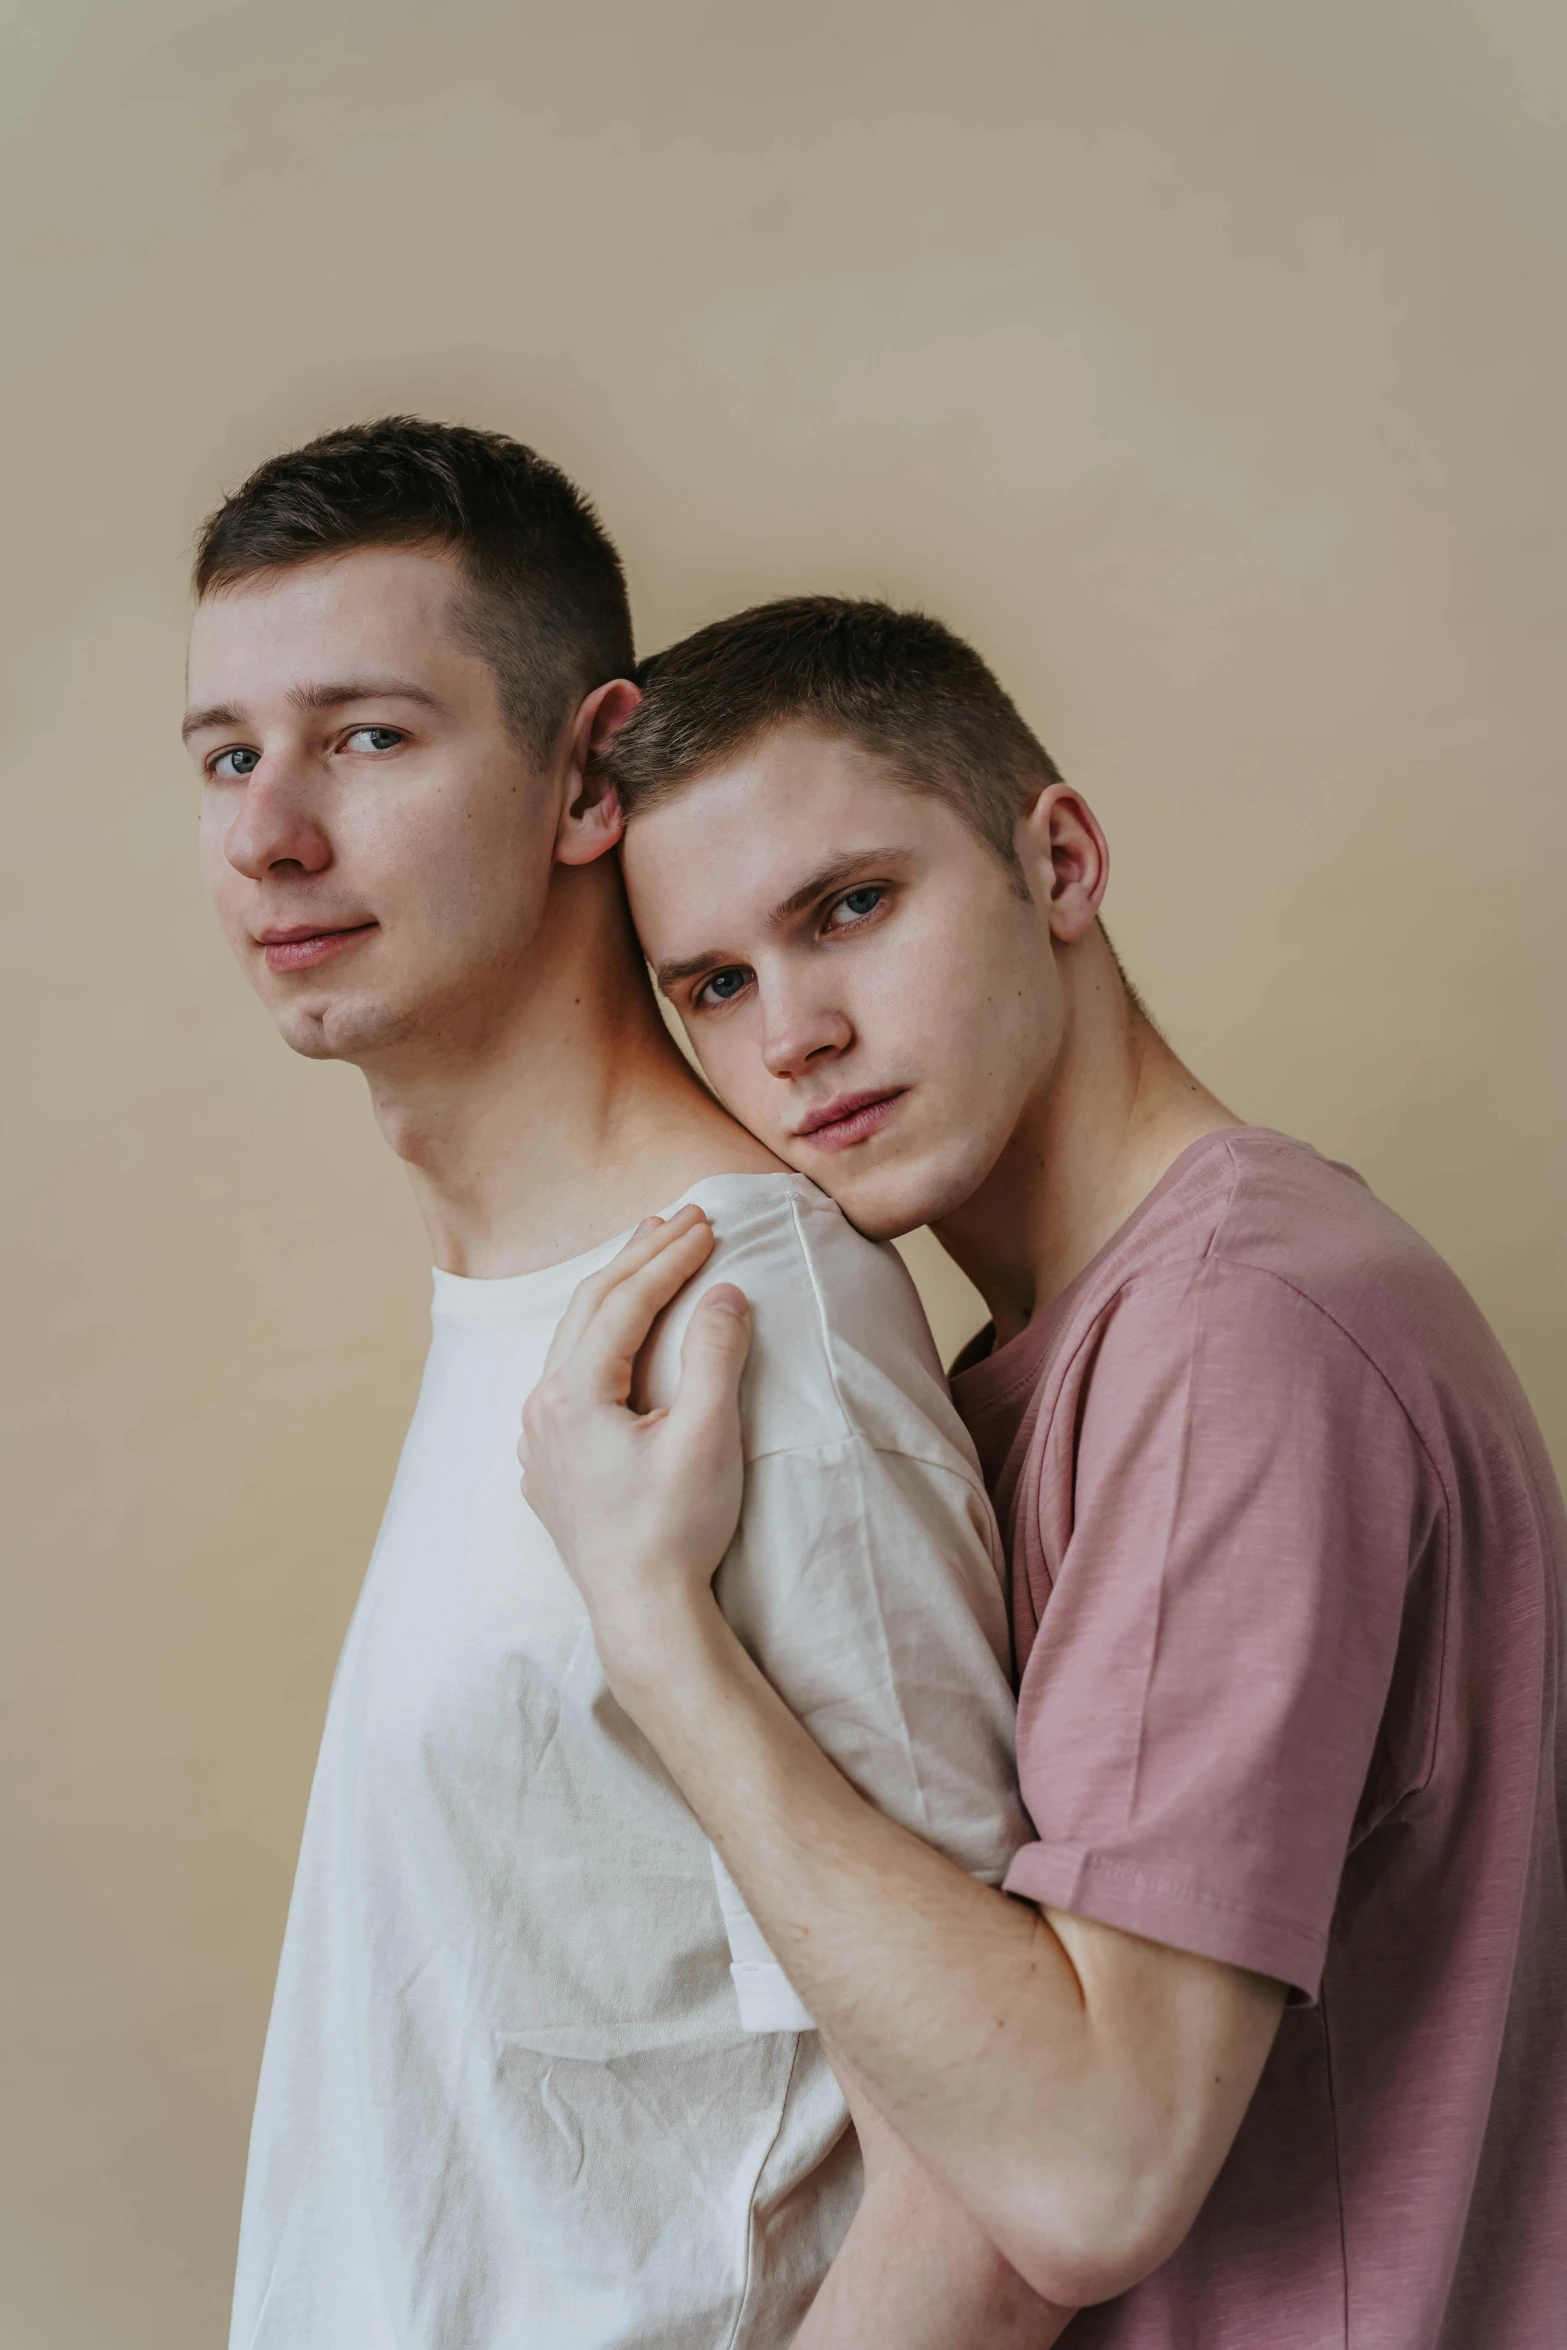 a couple of young men standing next to each other, by Attila Meszlenyi, smooth pale skin, holding each other, trending photo